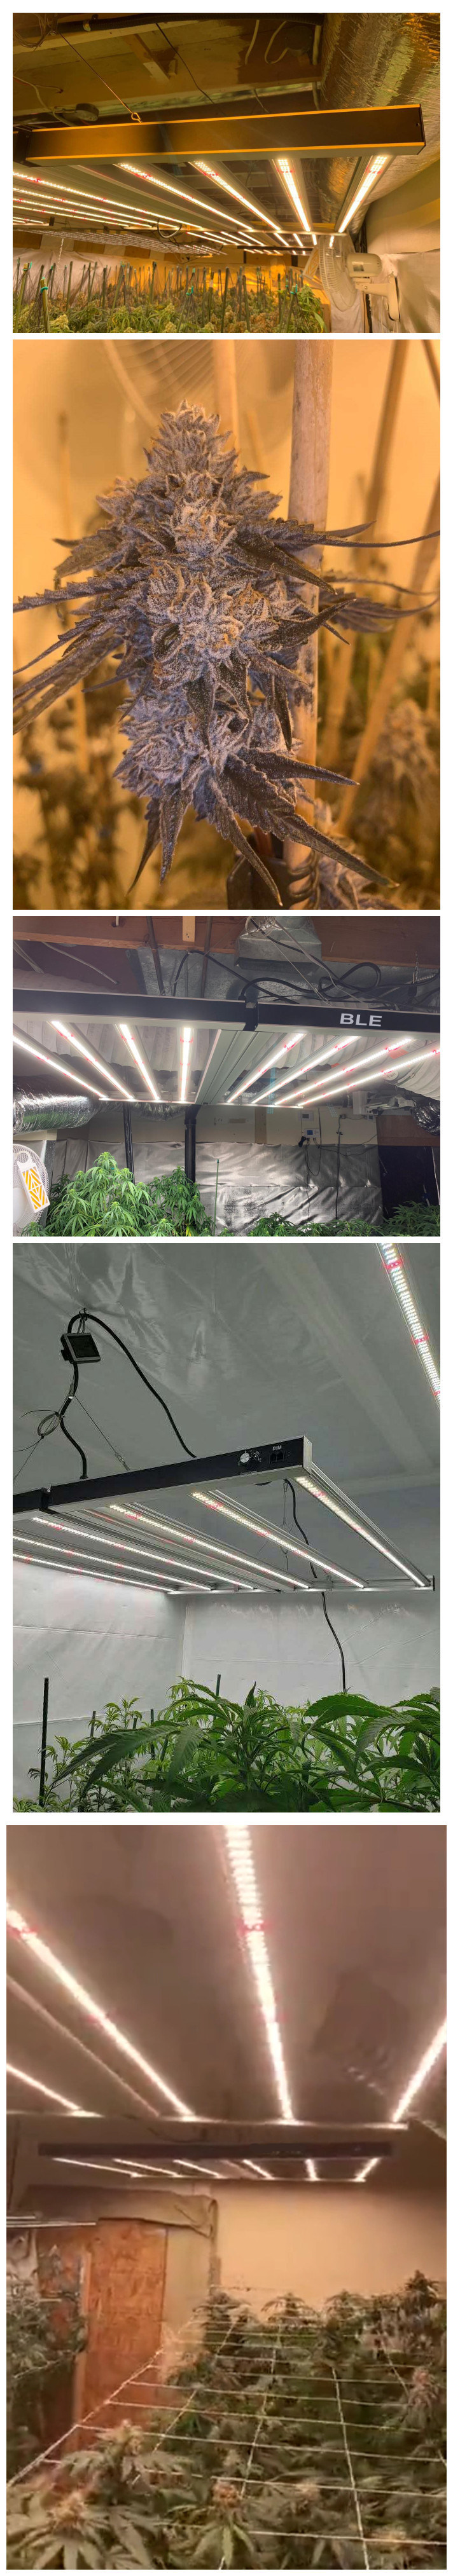 Horticulture Greenhouse Project Commercial LED Grow Light Group Control Dimming Timer Function Samsung Lm301b Diodes